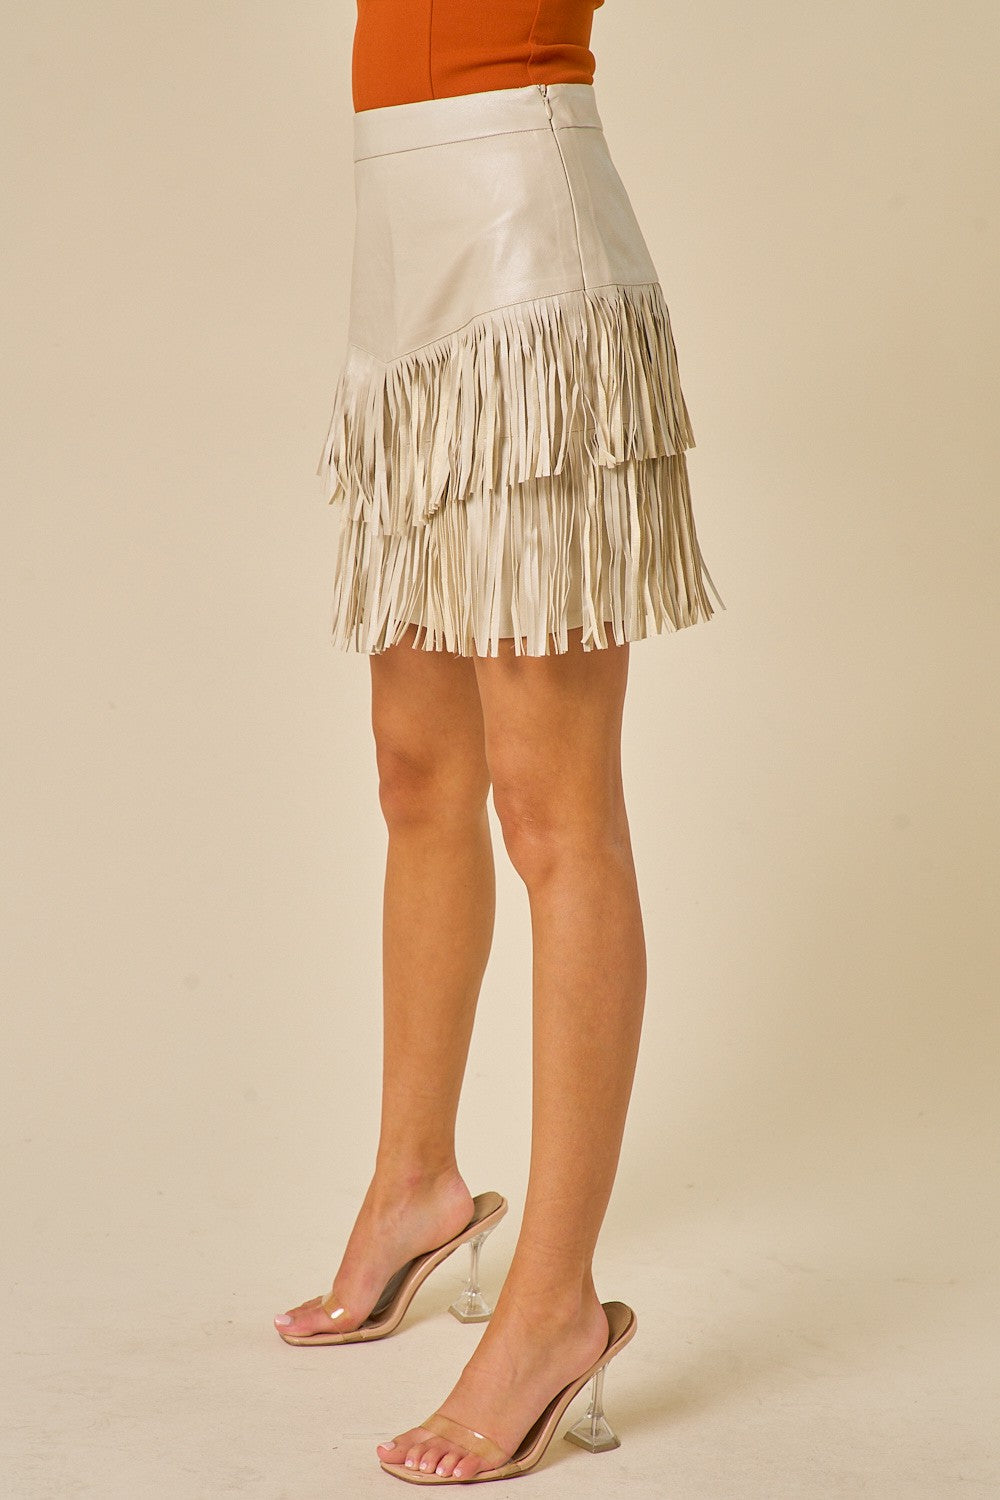 Clyde PU Leather Fringe Skirt